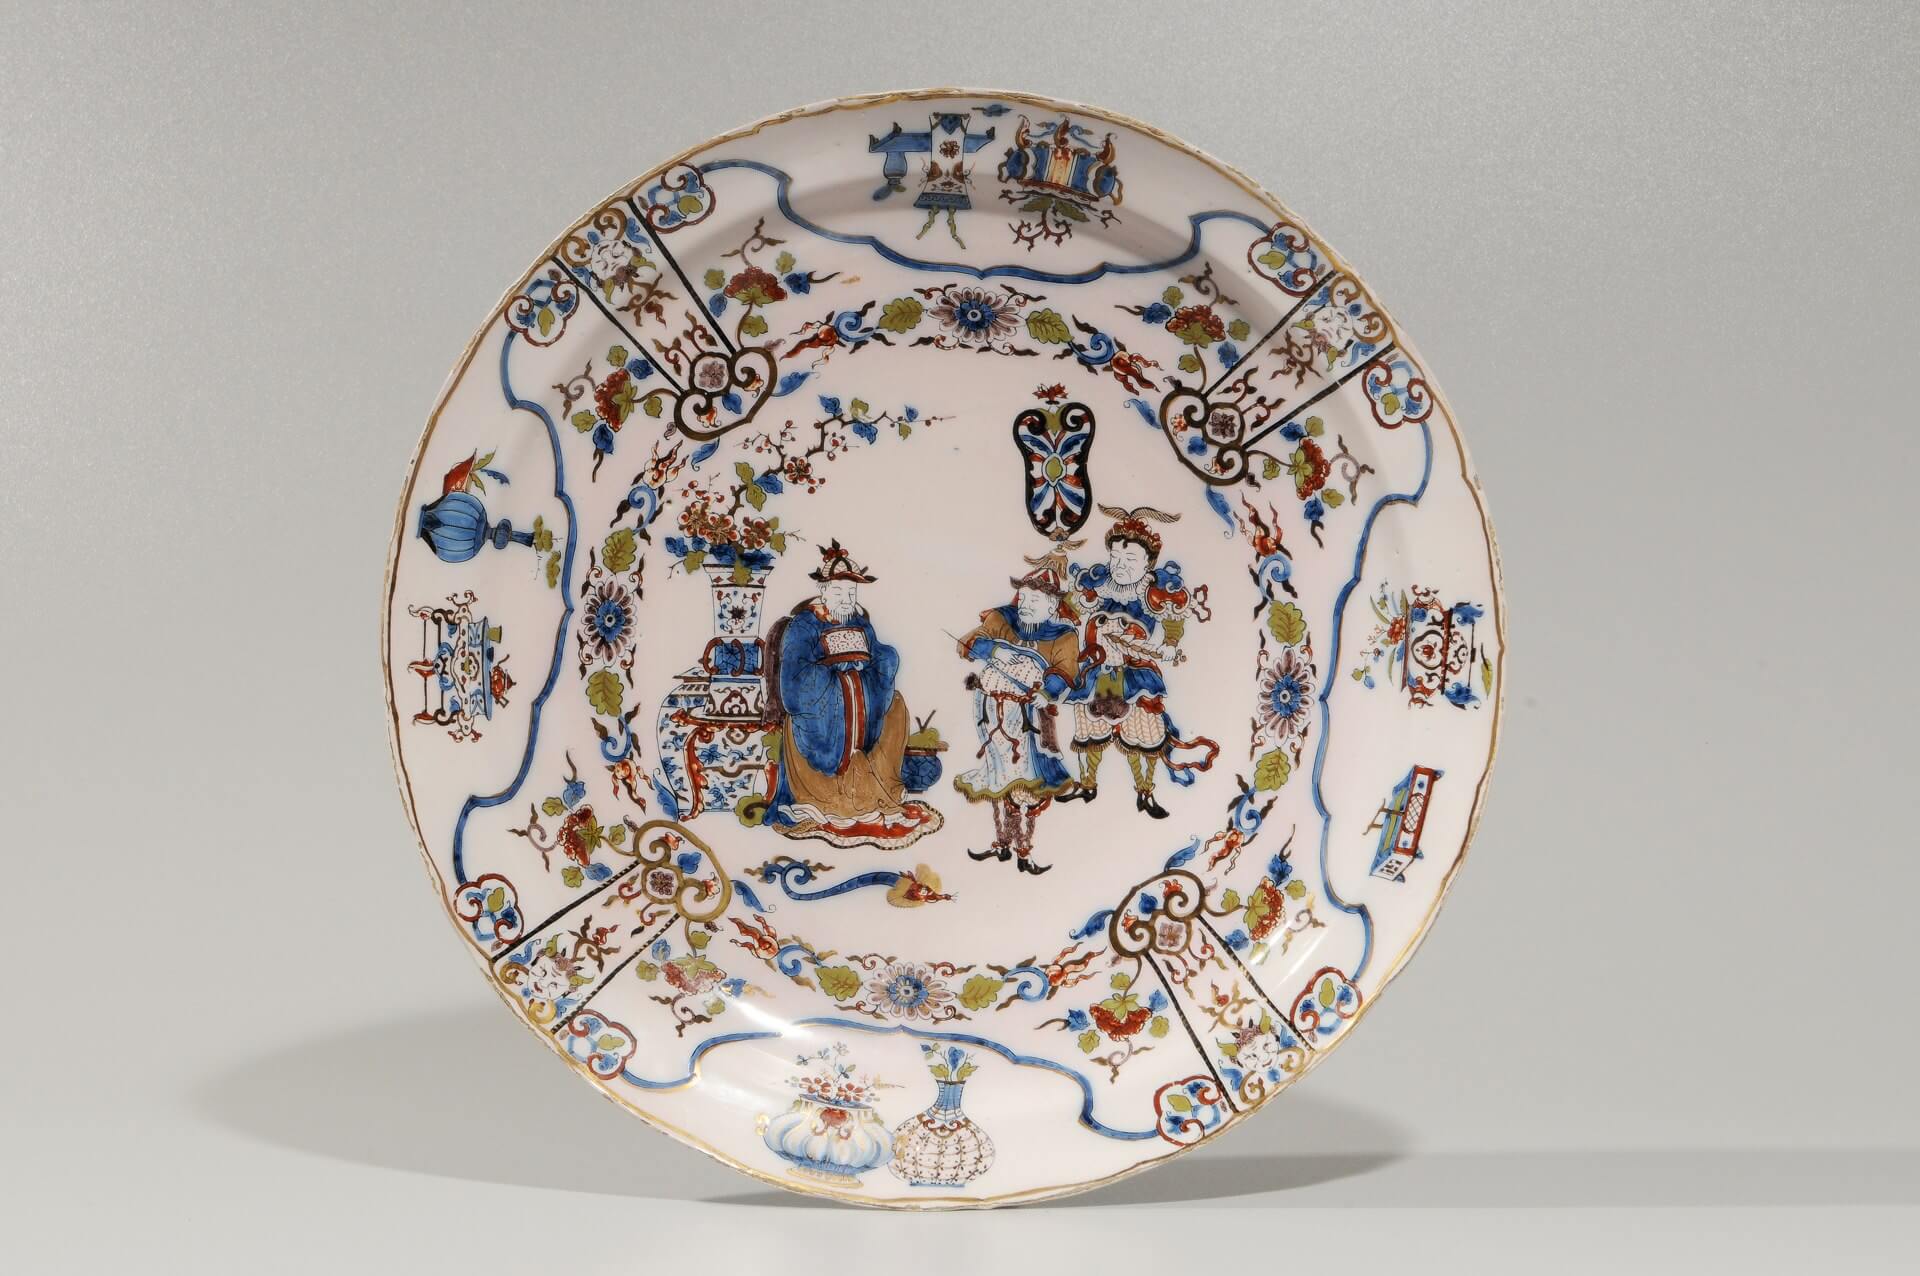 Polychrome and gilded chinoiserie charger Delft